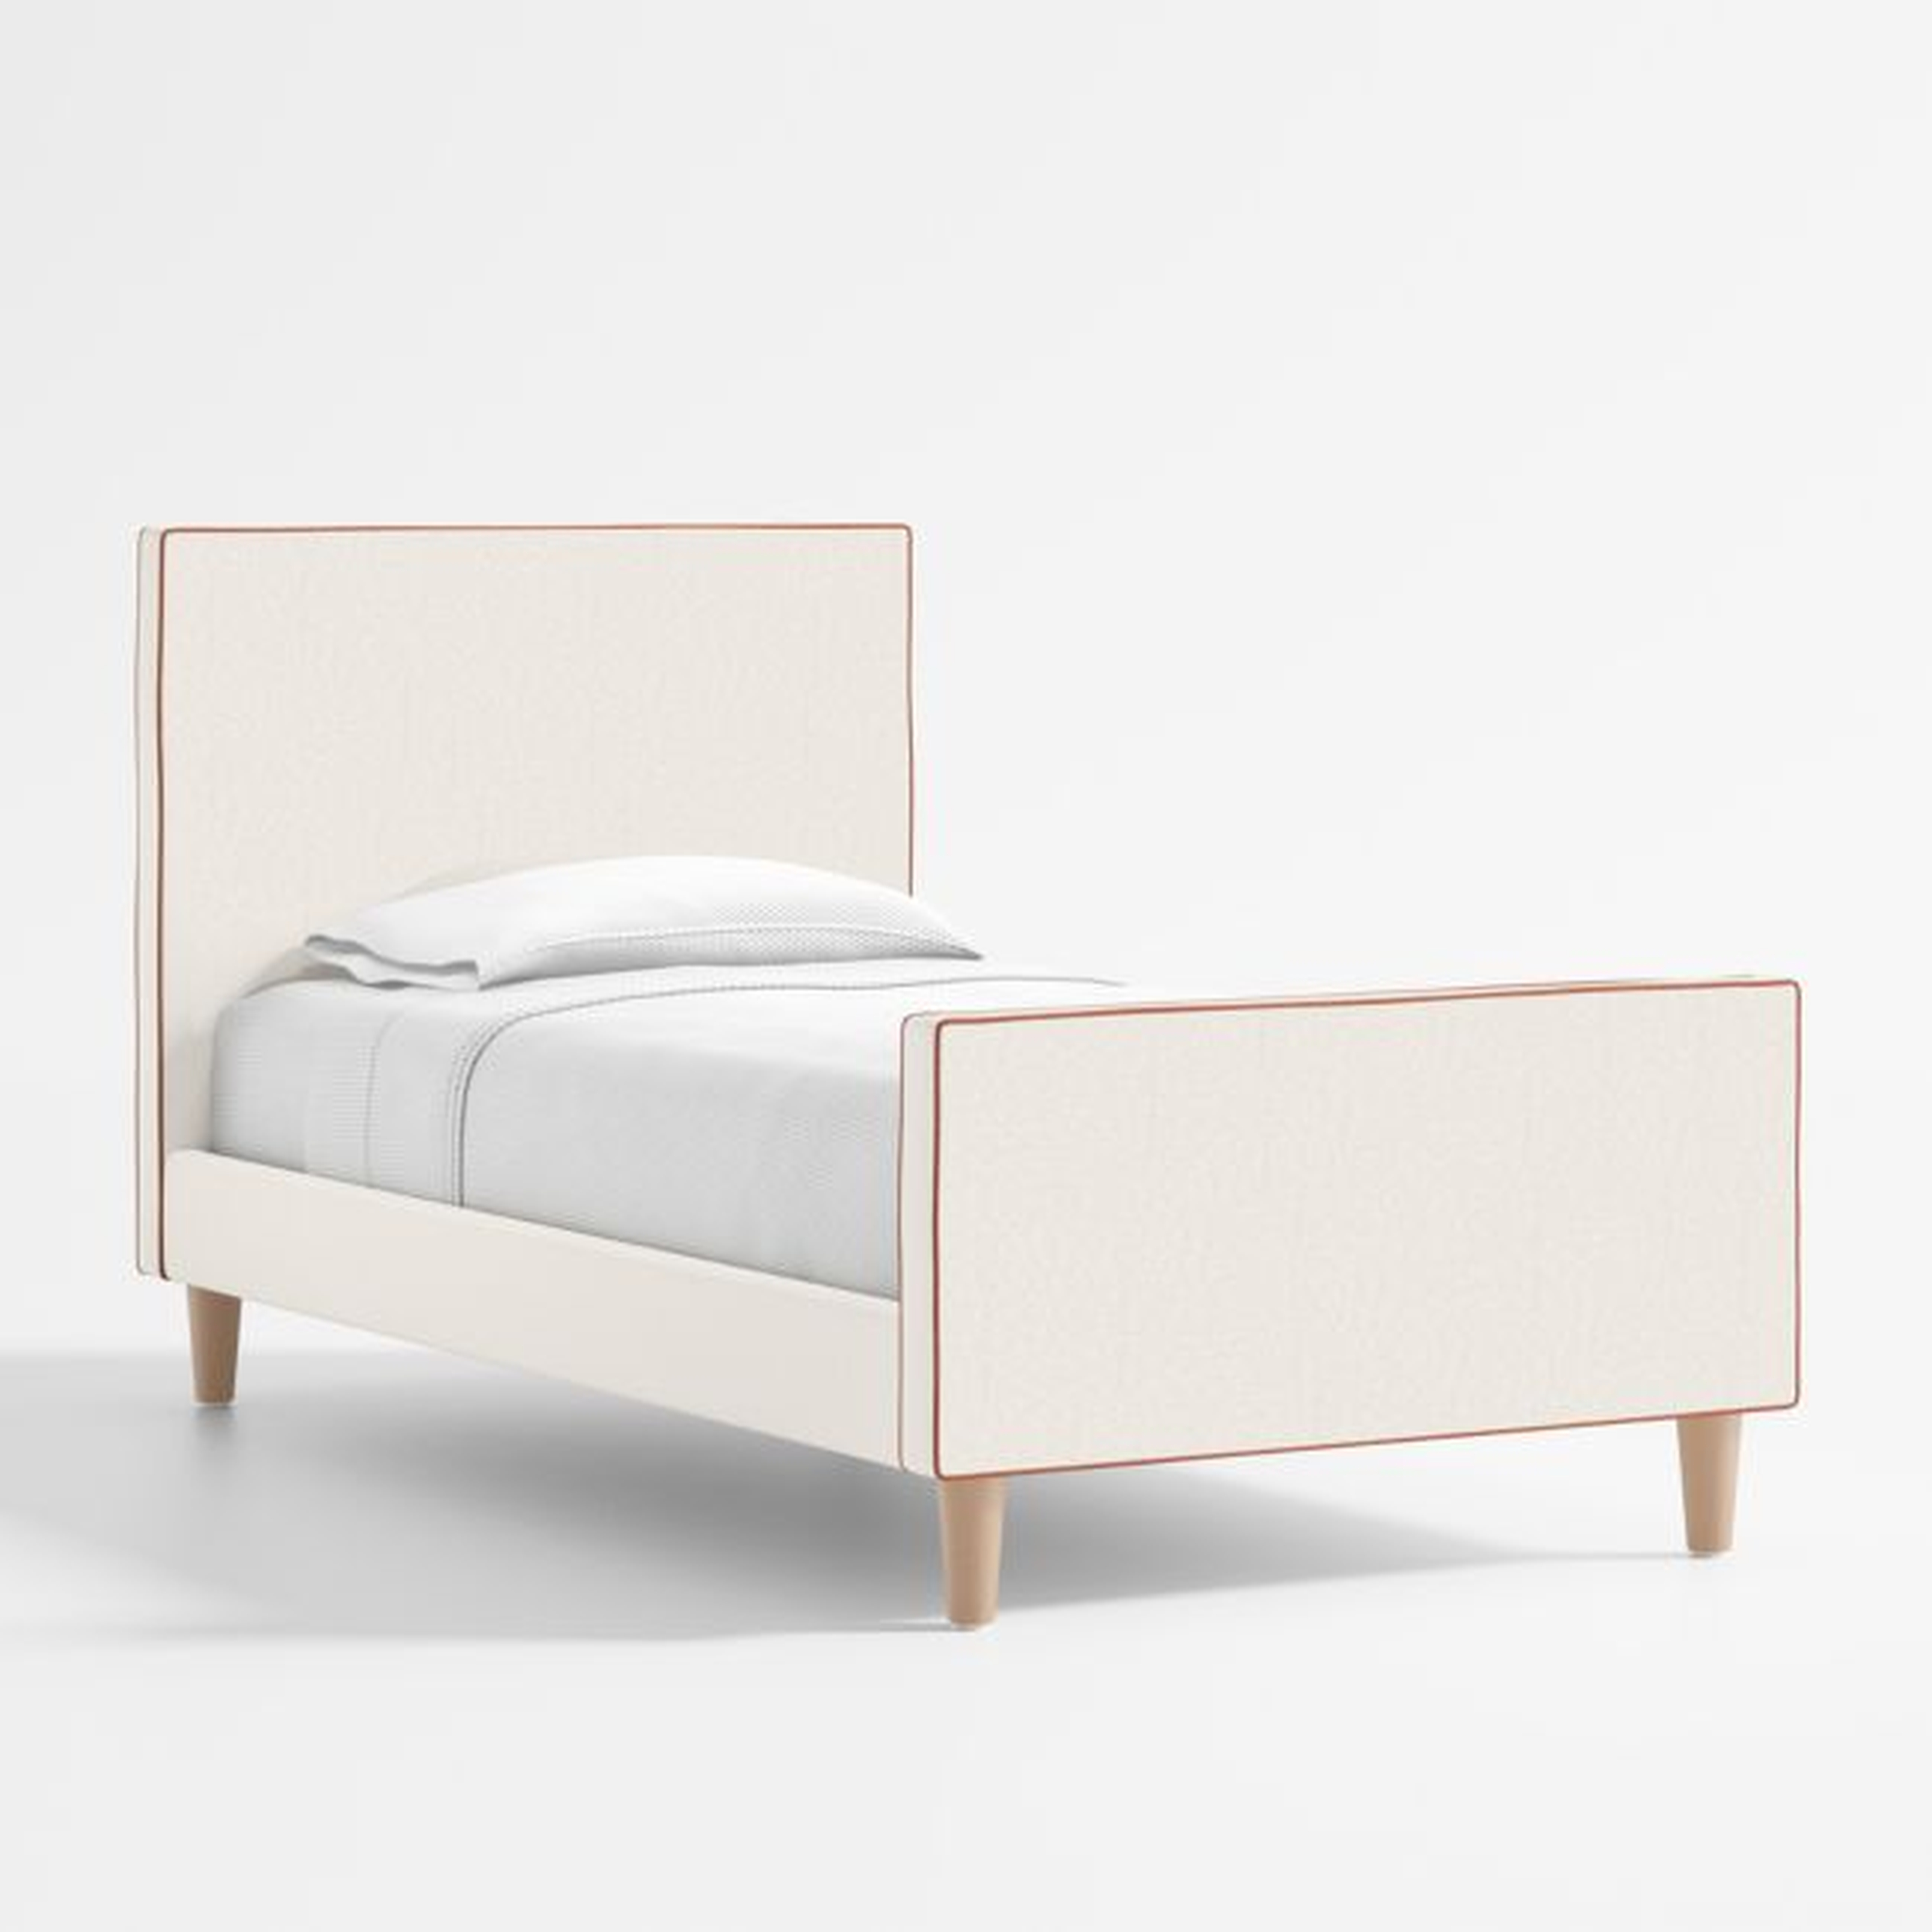 Pipeline Kids Pearl White Twin Upholstered Bed - Crate and Barrel